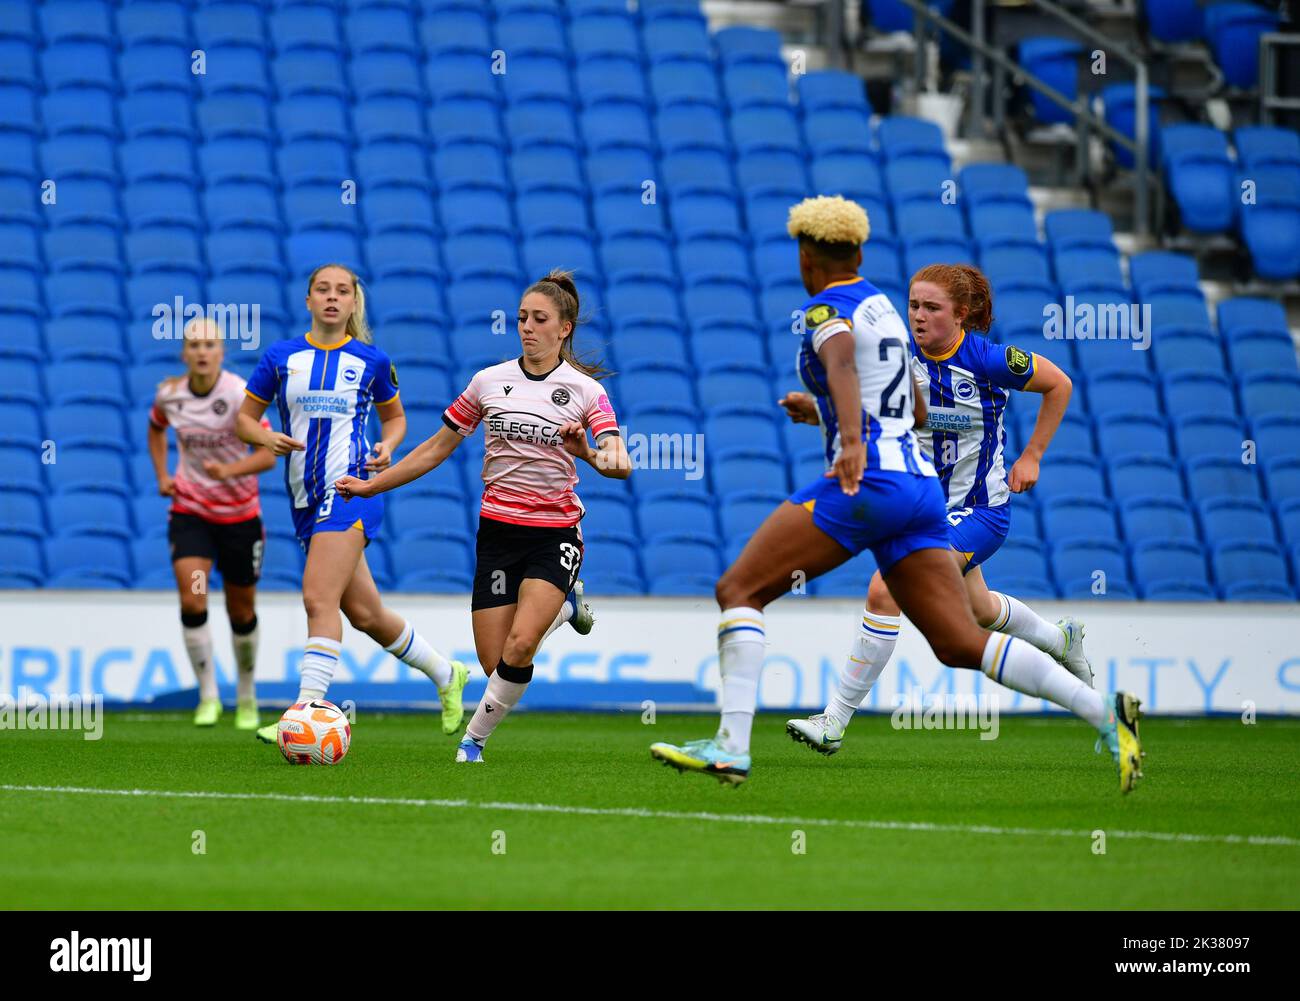 Brighton And Hove, UK. 25th Sep, 2022. Tia Primmer of Reading during the FA Women's Super League match between Brighton & Hove Albion Women and Reading Women at American Express Community Stadium on September 25th 2022 in Brighton and Hove, United Kingdom. (Photo by Jeff Mood/phcimages.com) Credit: PHC Images/Alamy Live News Stock Photo